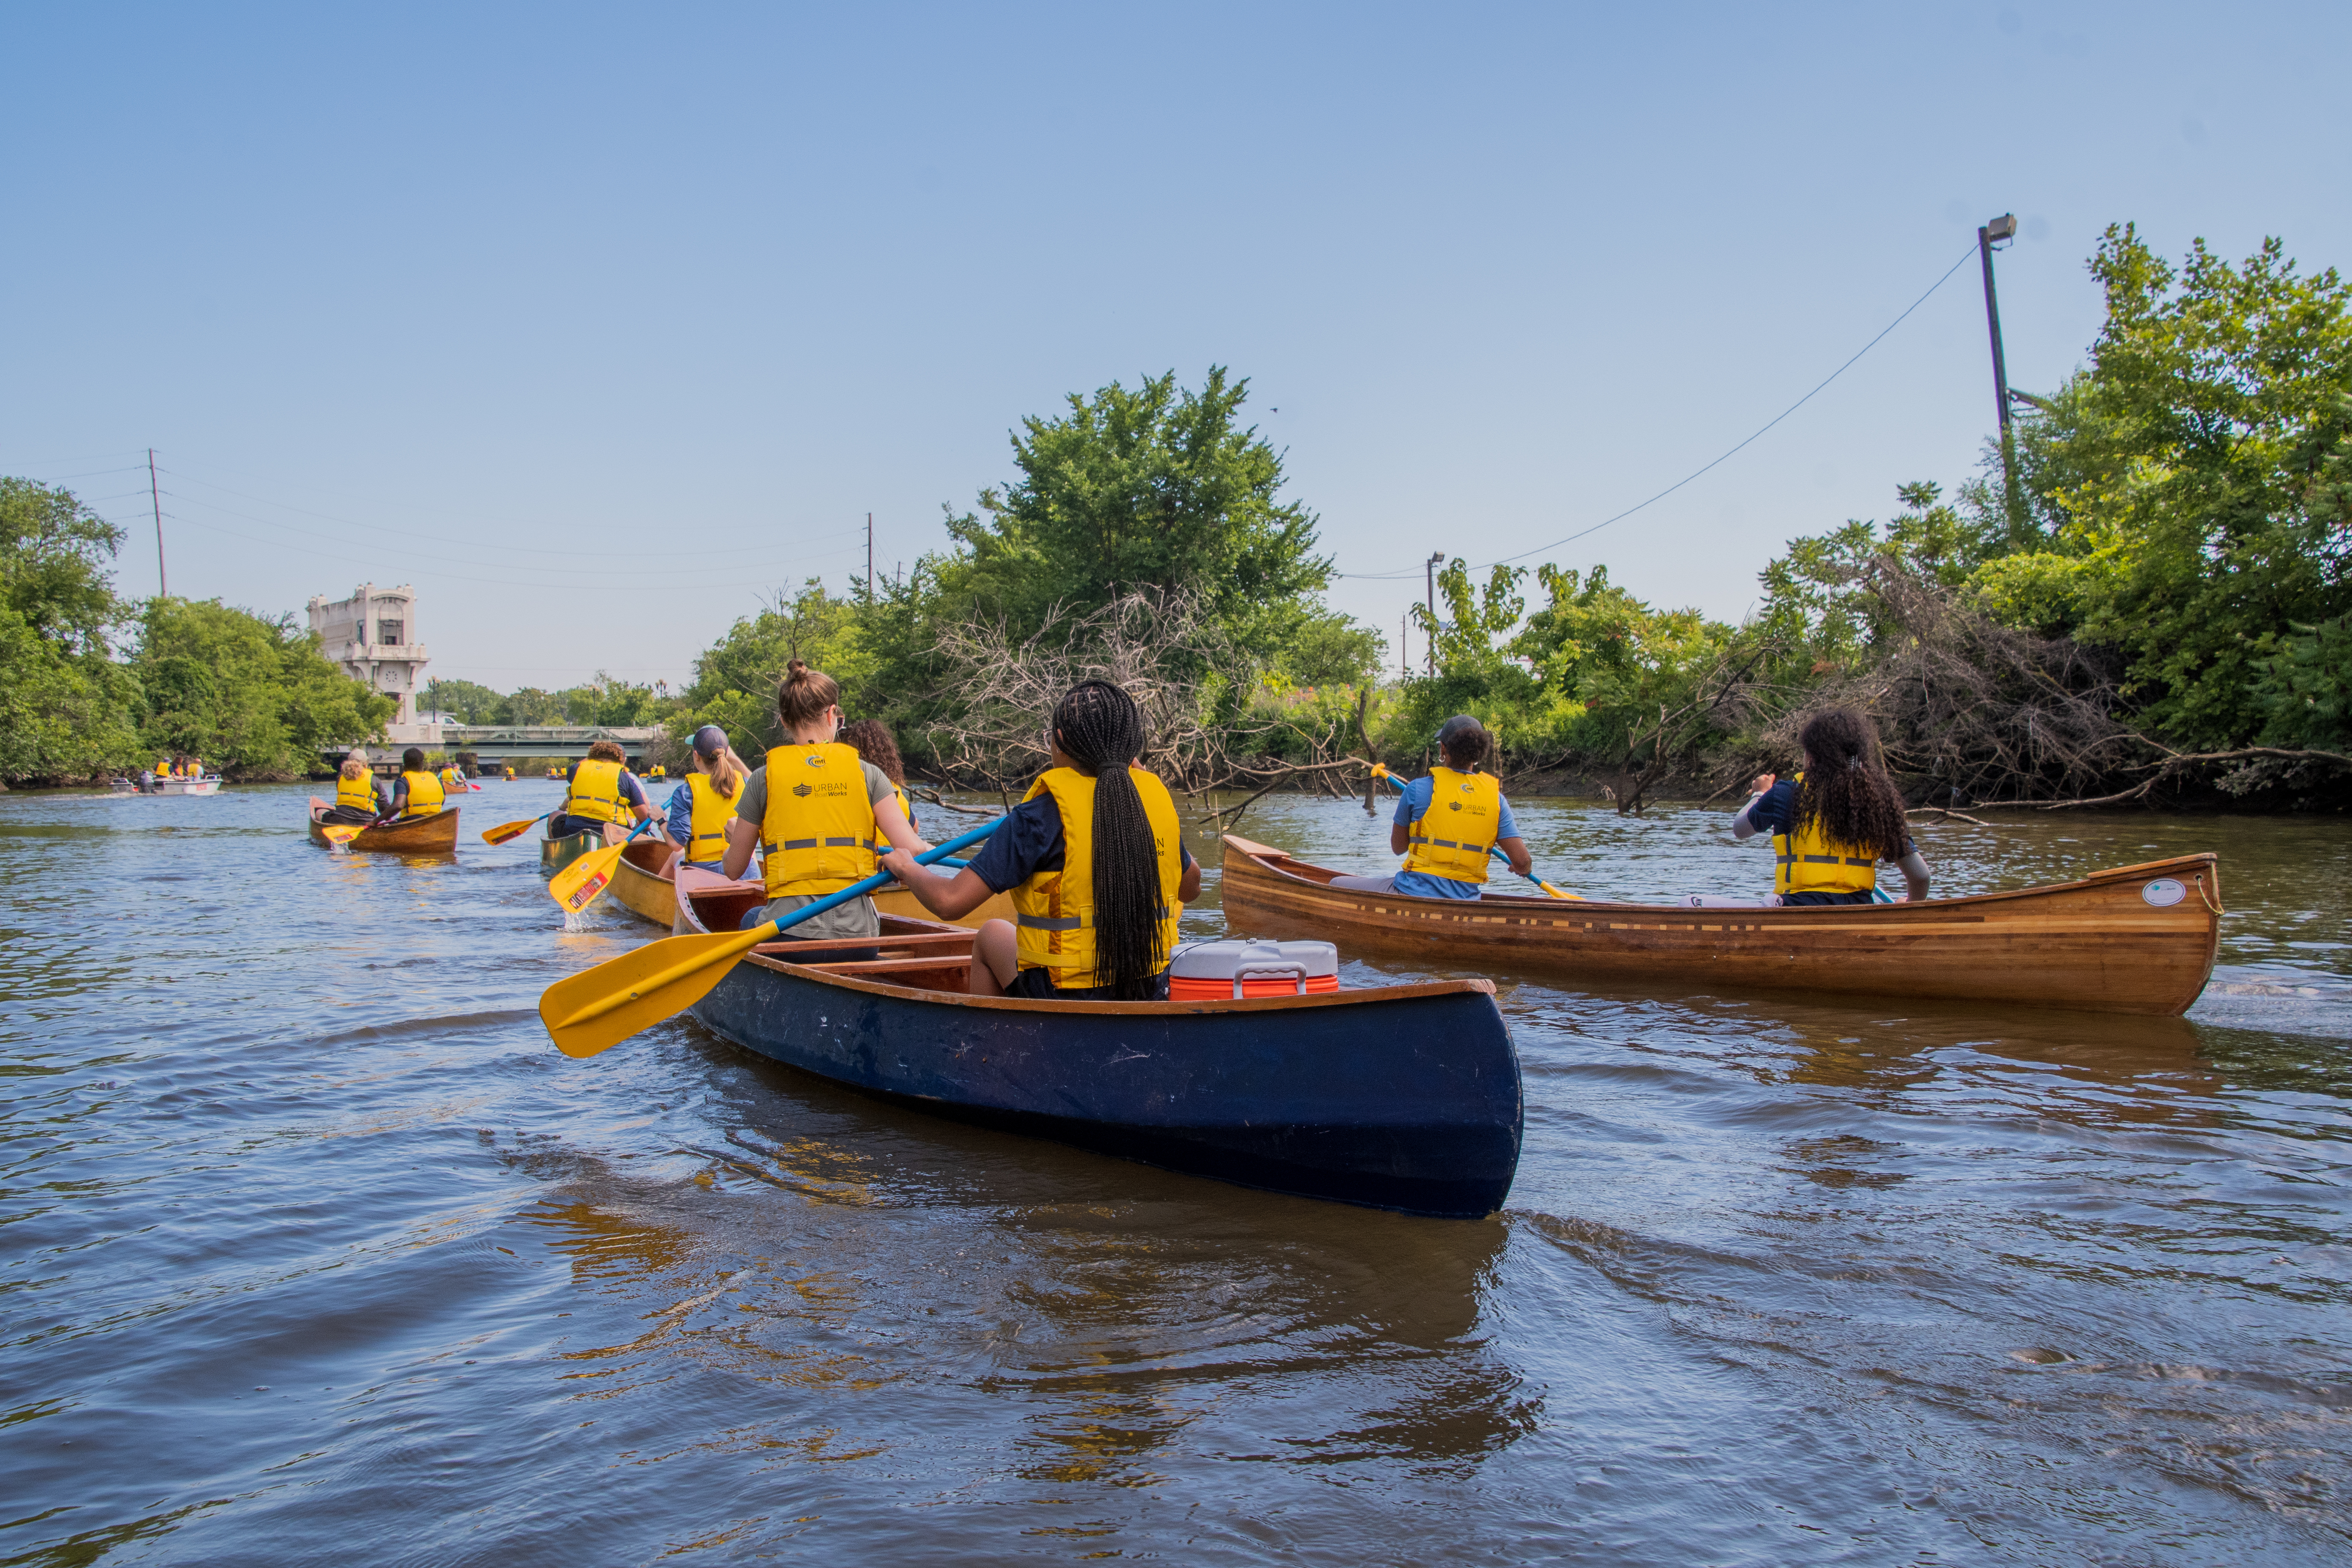 A group of people wearing yellow life vests, in canoes, on a river